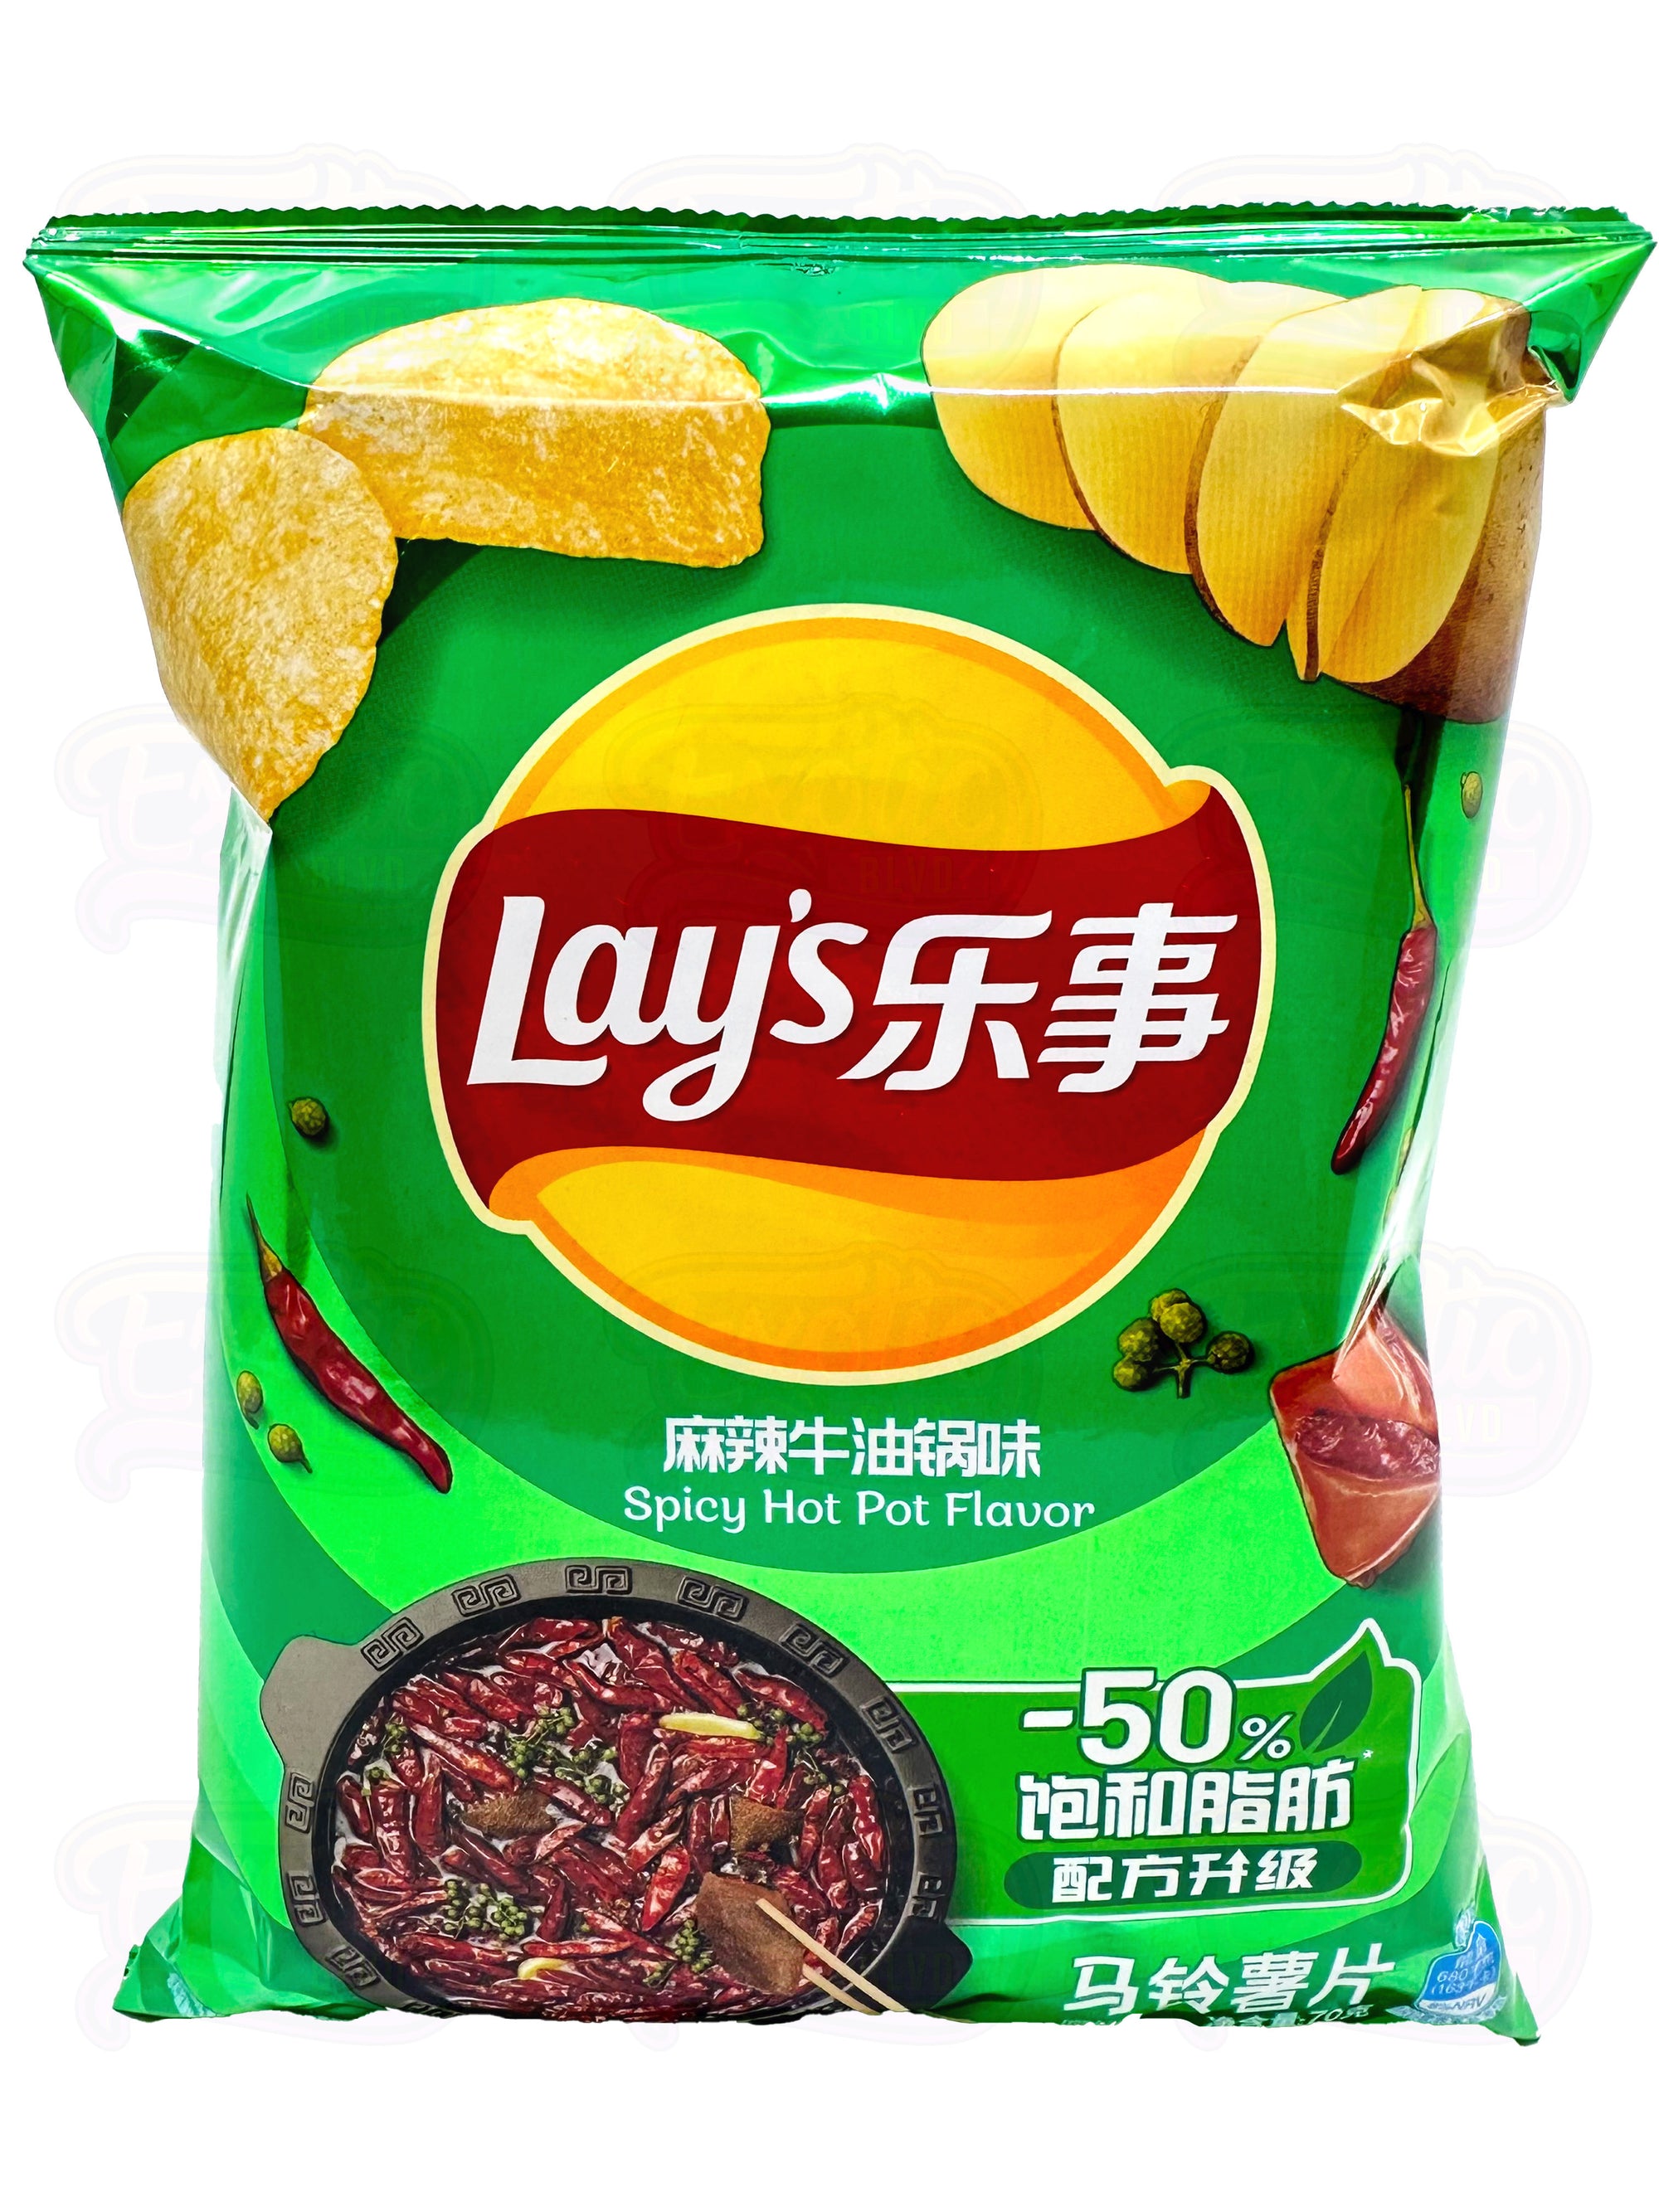 Lay's Spicy Hot Pot